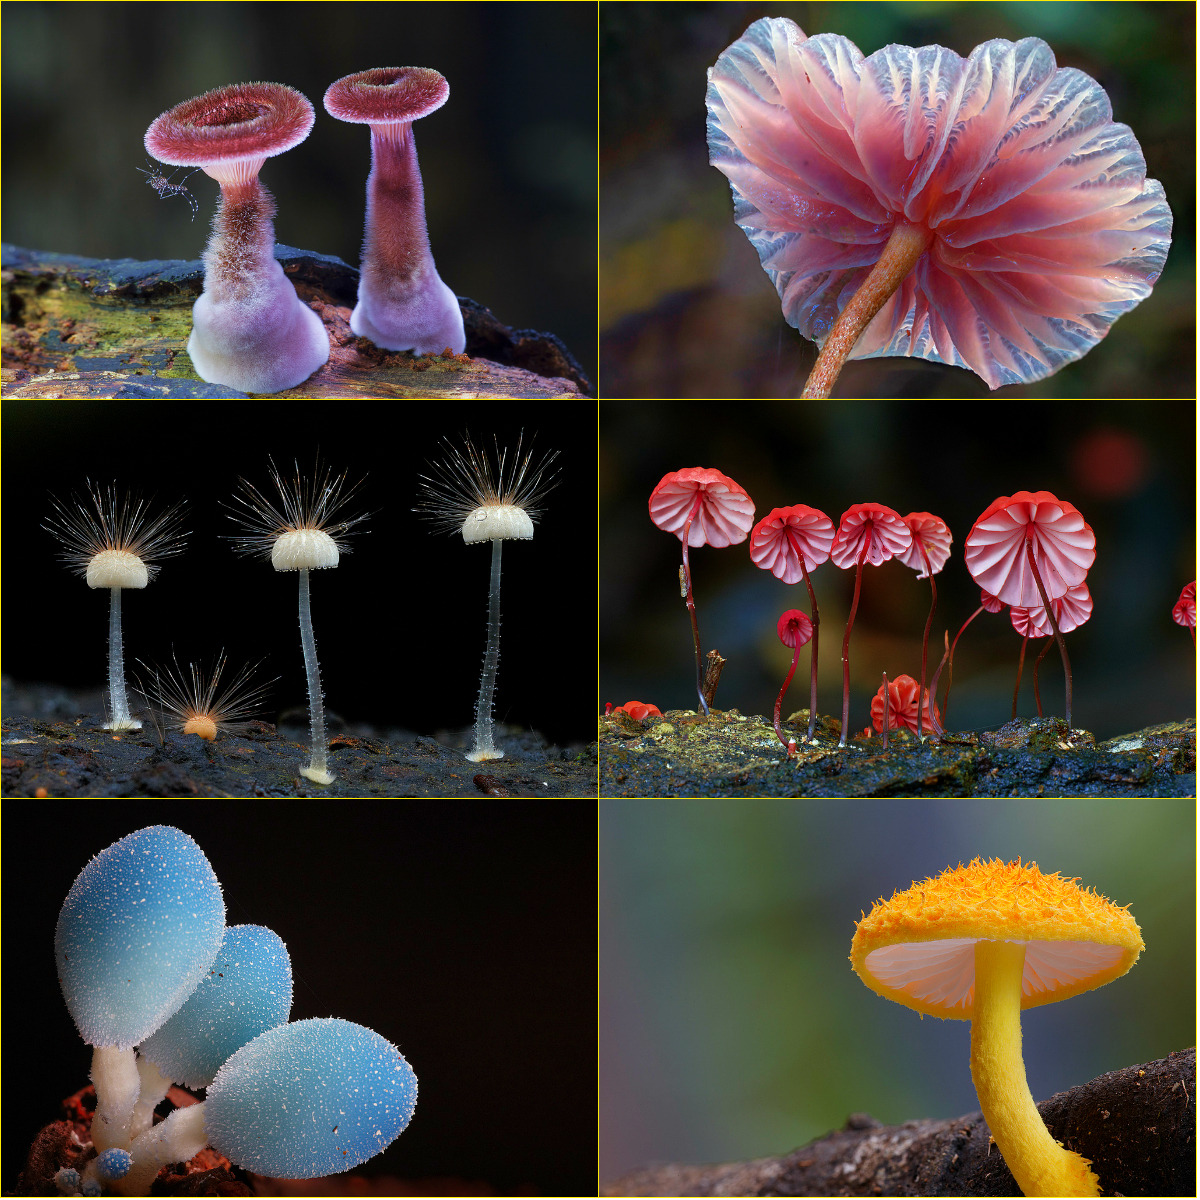 Nature can be weird and wonderful, and mushrooms are one of the weirder things that exist on this planet. But also some of the most beautiful as photographer Steve Axford documents in these amazing macro shots of hairy mycena and all kinds of other rare fungal shoots. Check out his Flickr photostream for a full dose of trippindicular shrooms. Beautiful stuff. 
Via Collosal. Collage made with Pixlr Express.